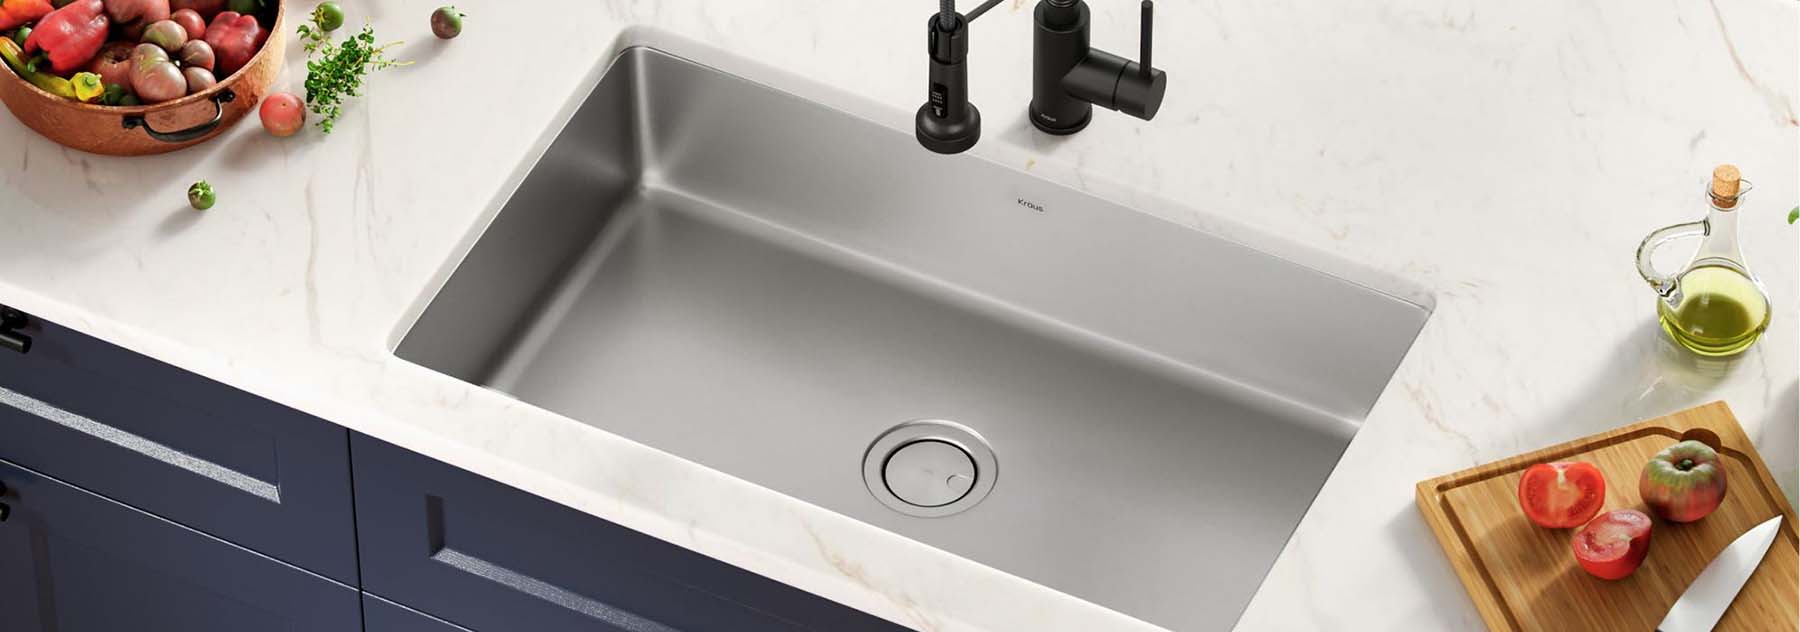 Antibacterial Sinks from Dex Collection by KRAUS